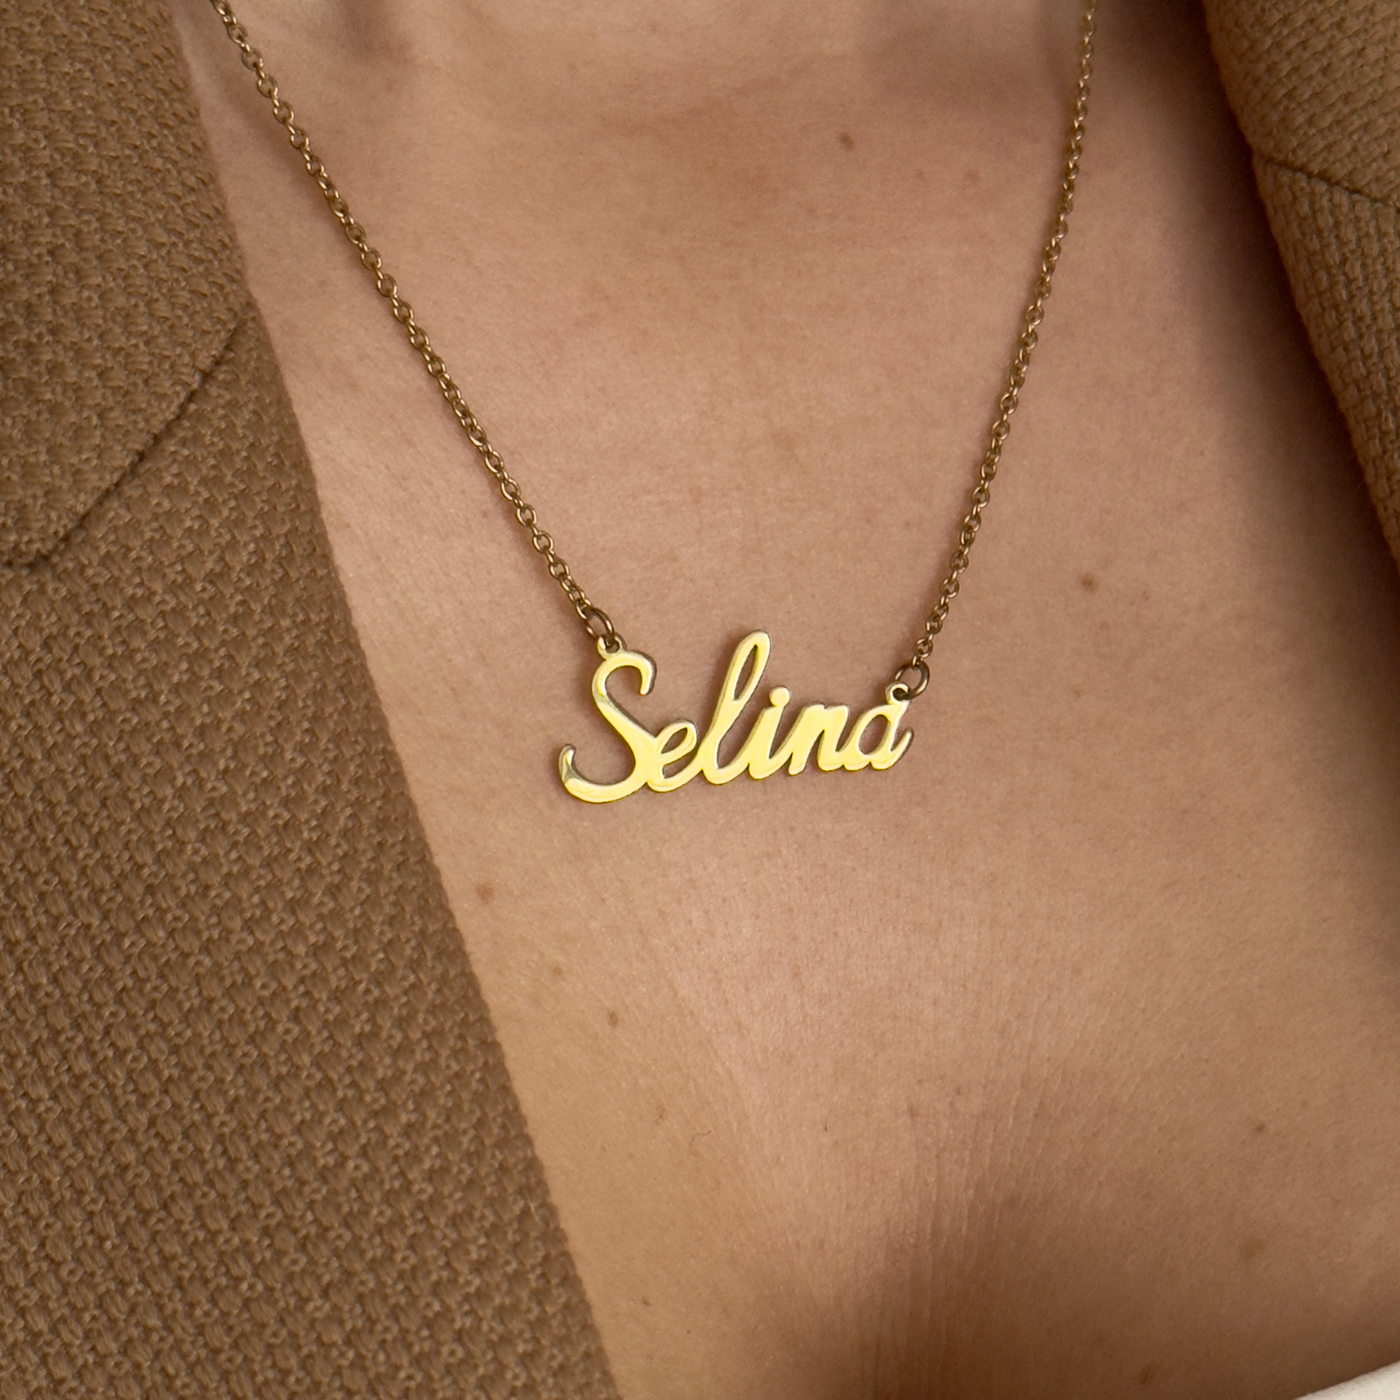 Name necklace - variant Selina